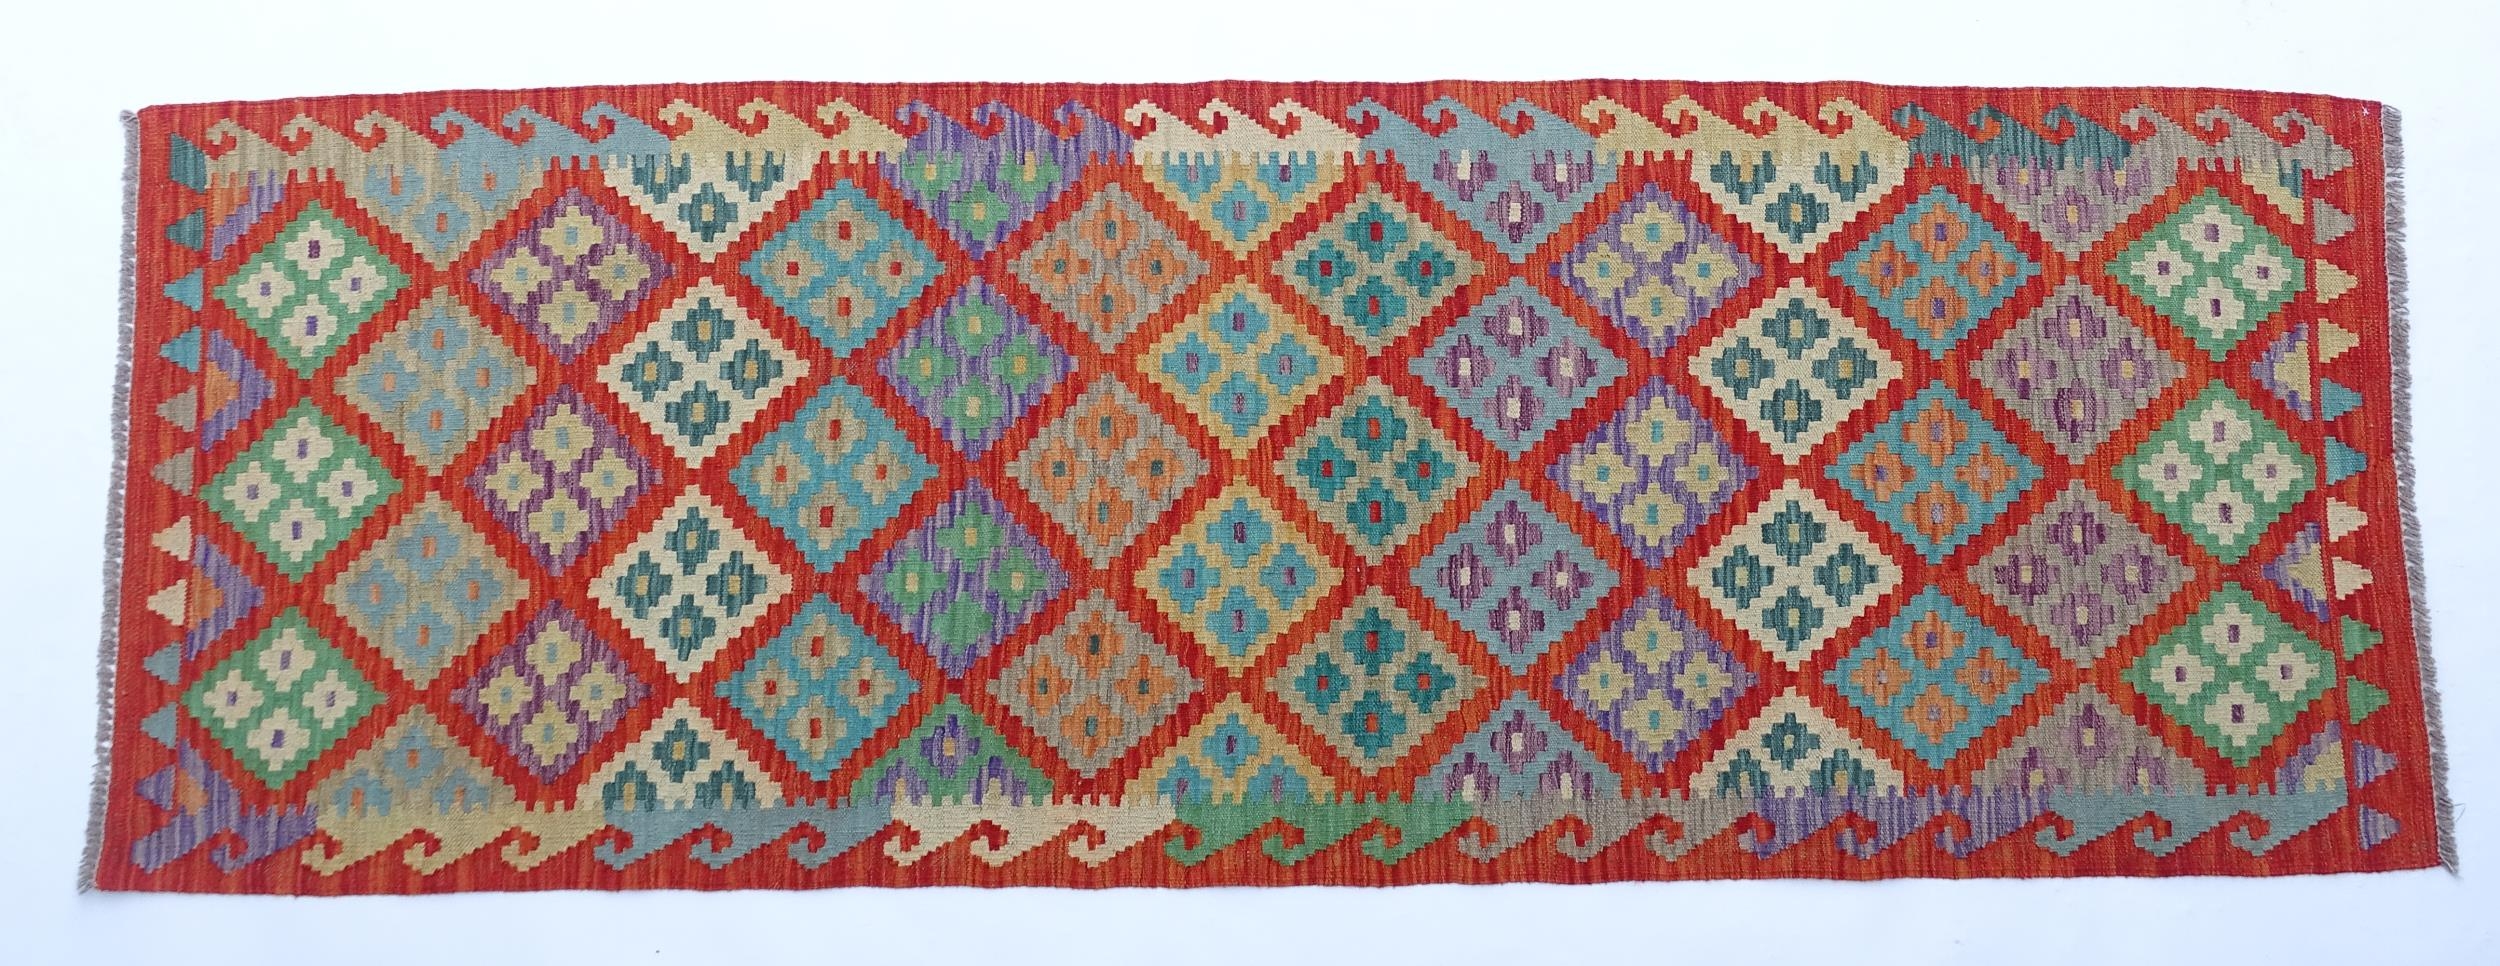 Carpet / Rug: A Turkish Anatolian kilim decorated with geometric motifs. Approx. 97" x 34" Please - Image 3 of 9